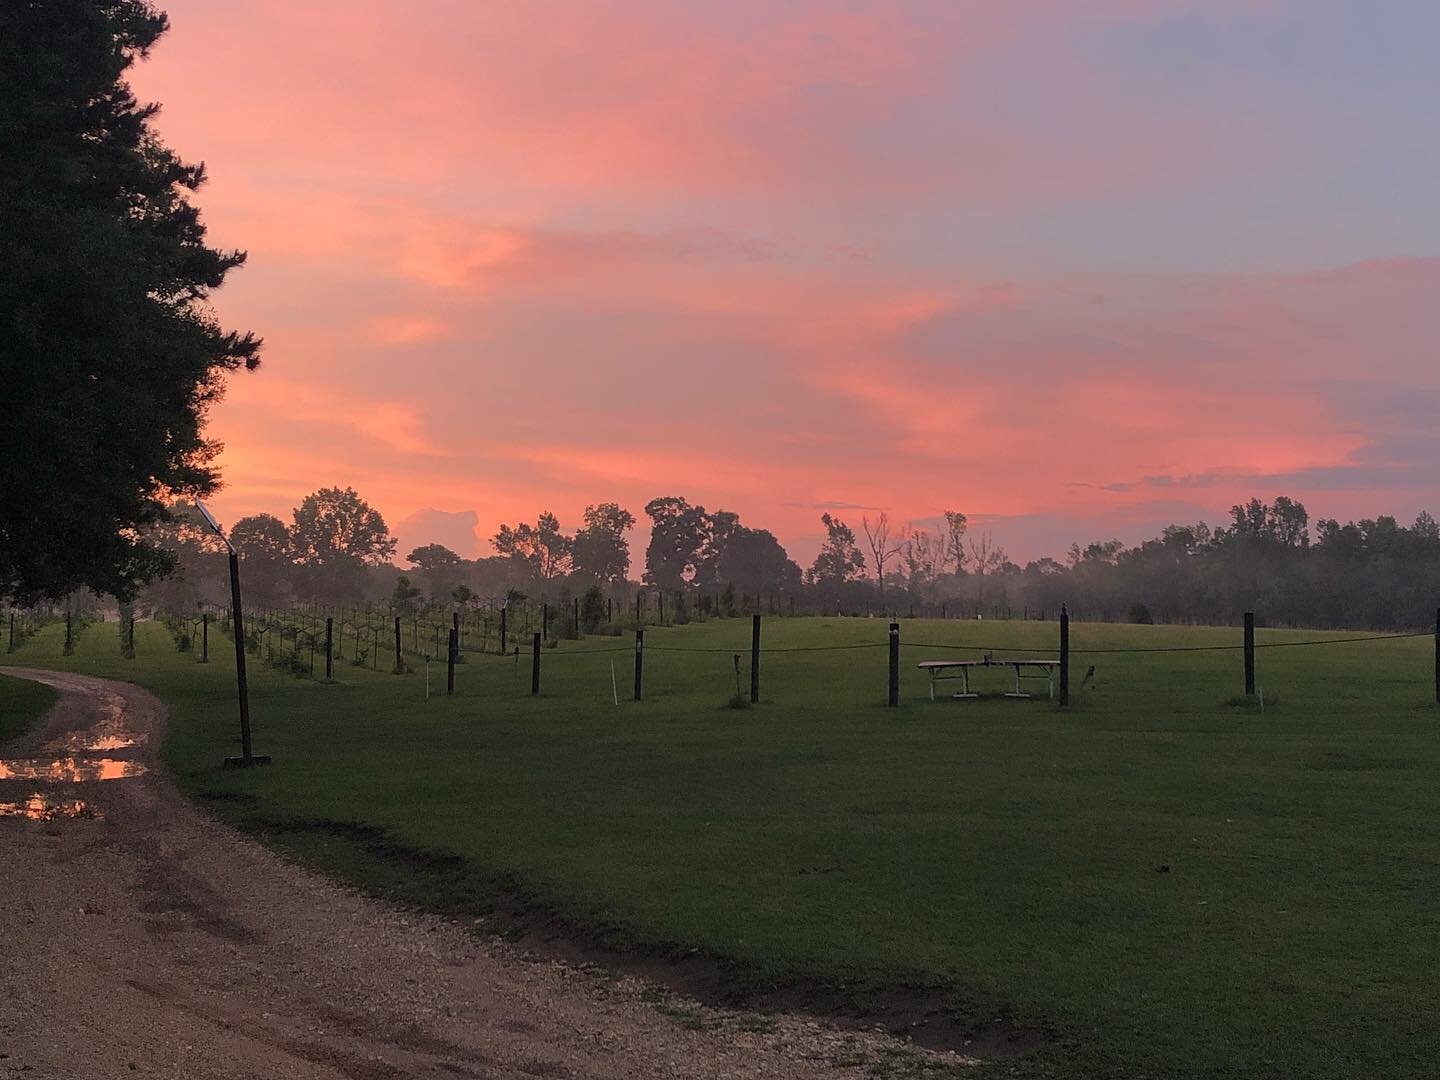 A stunning sunset at Wild Bush after the rain. The sky was ablaze with vibrant colors, creating a breathtaking scene. The beauty of this place never ceases to amaze me. #vineyardsunset #wildbush